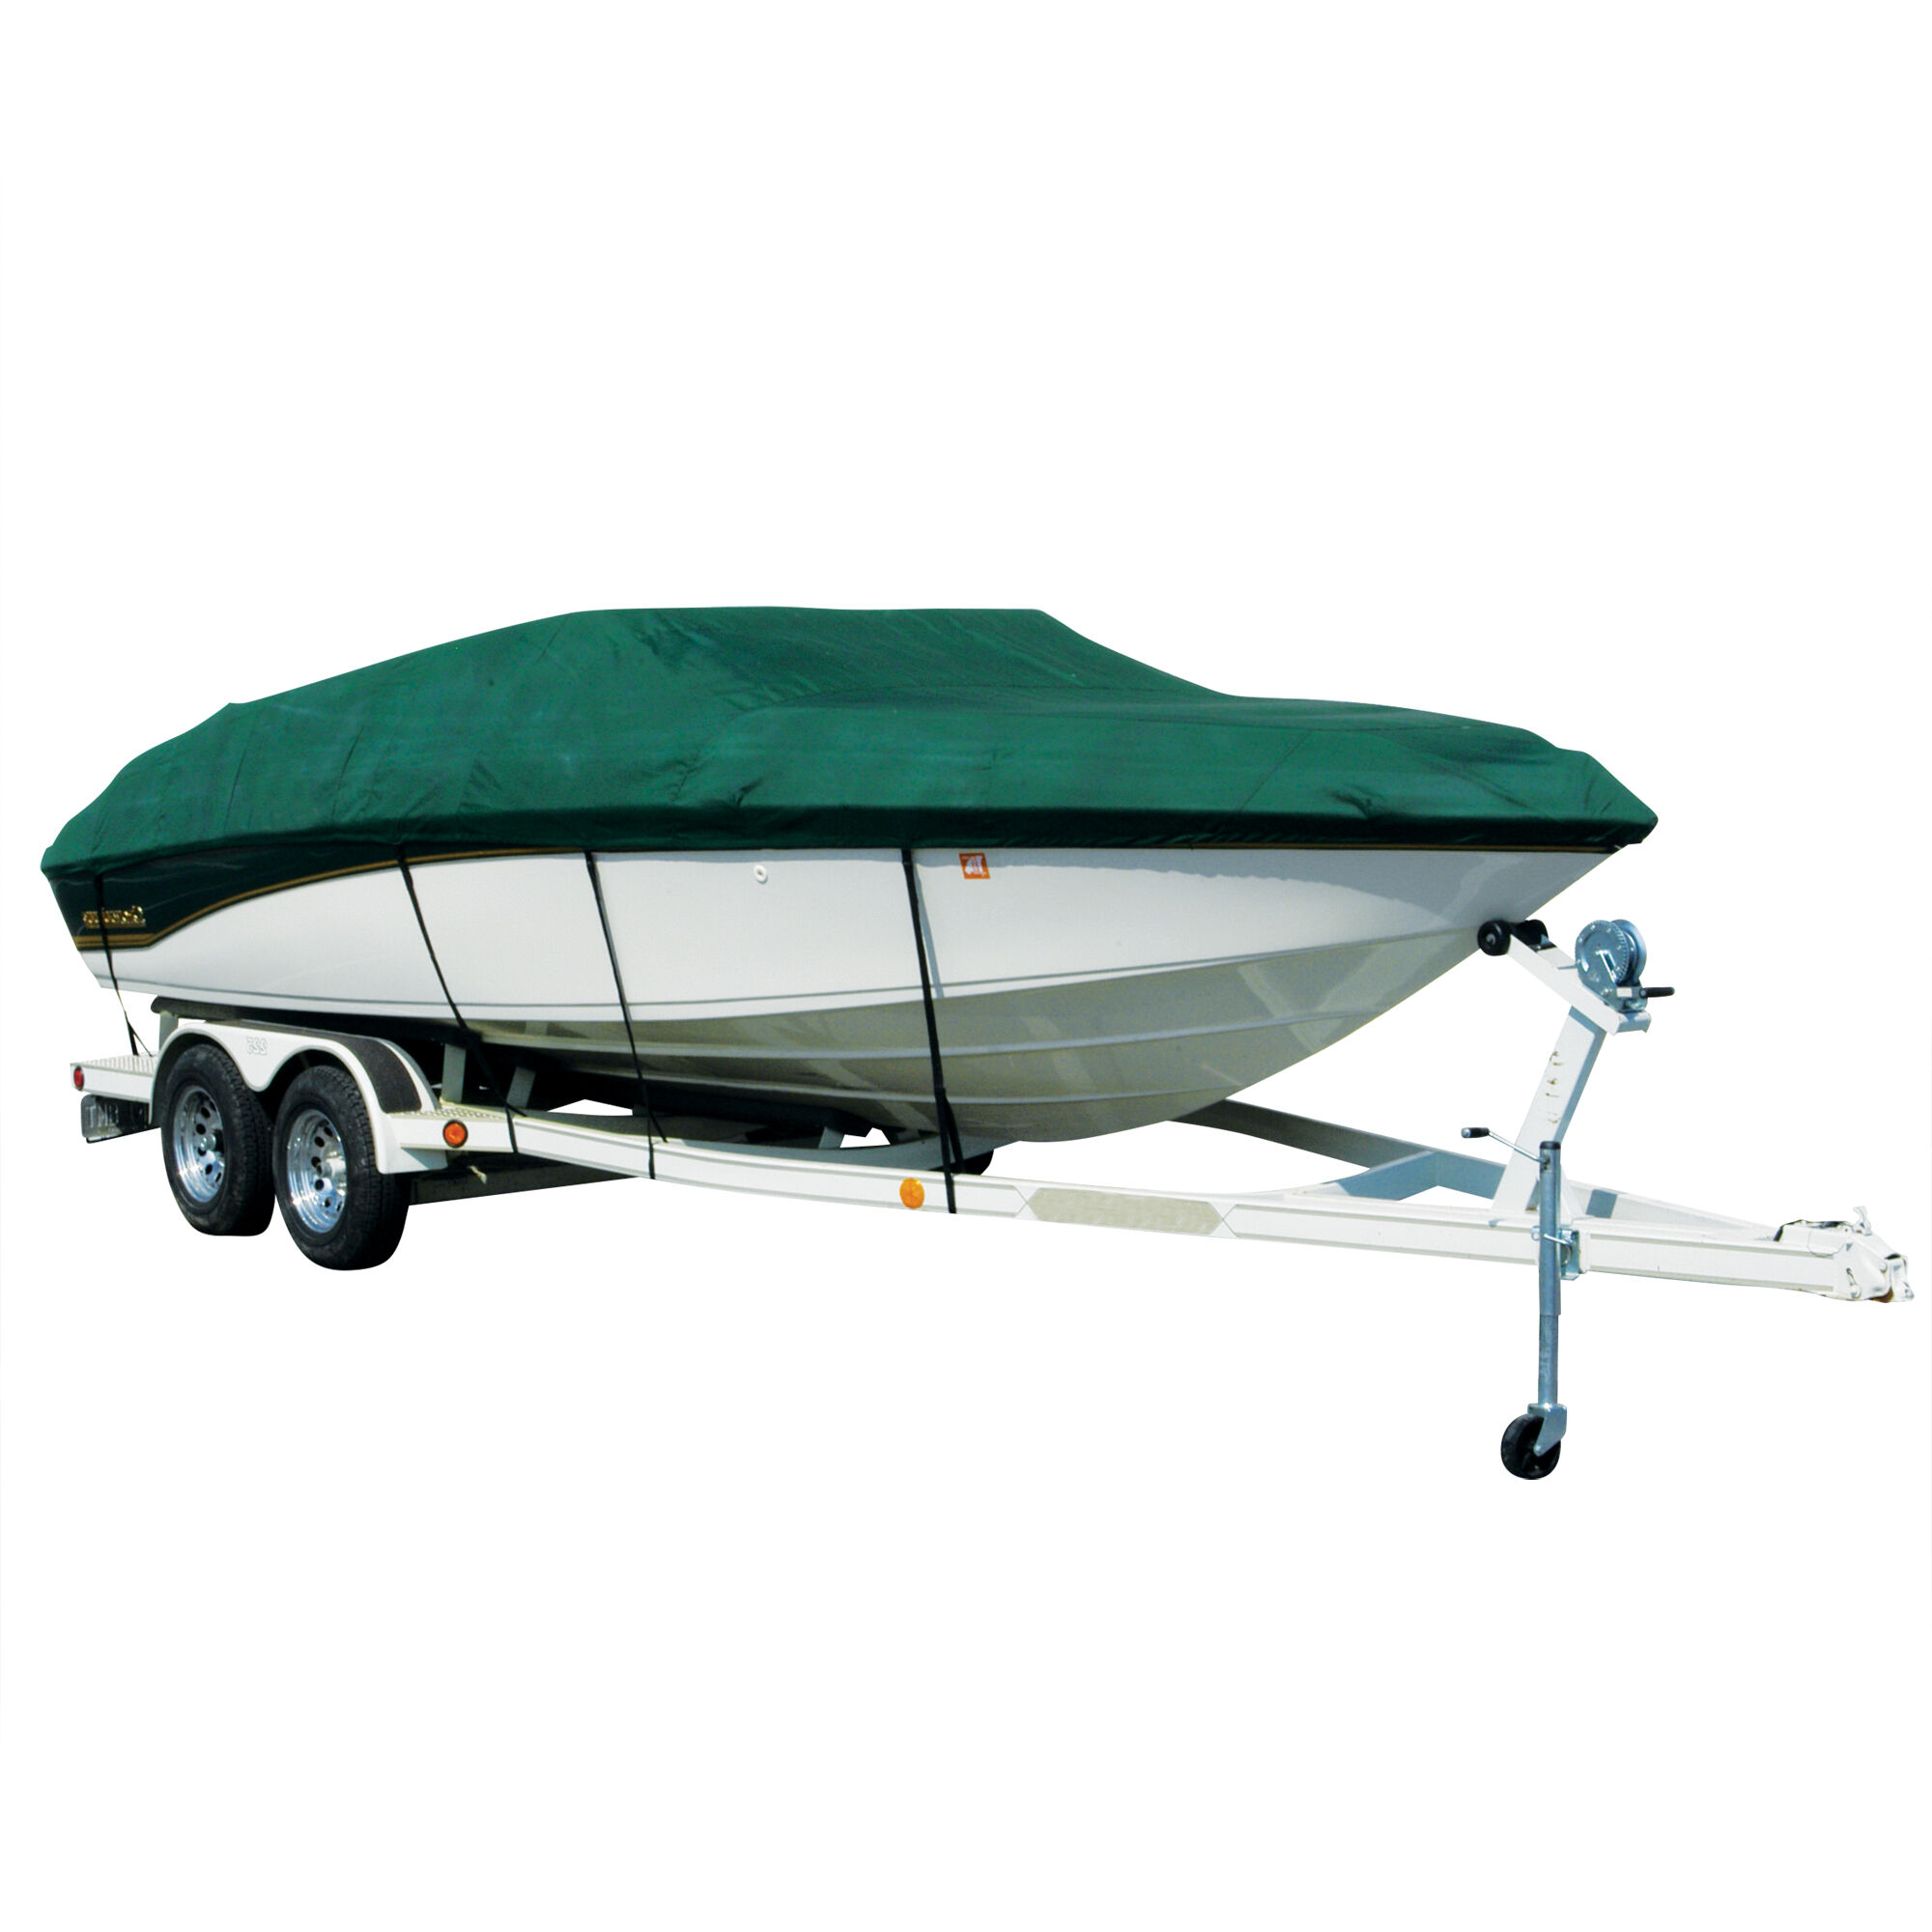 Covermate Exact Fit Sharkskin Boat Cover For Tracker Pro Guide V-175 Wt Bow Rider w/ Minnkota Port Trolling Motor I/O in Forest Green